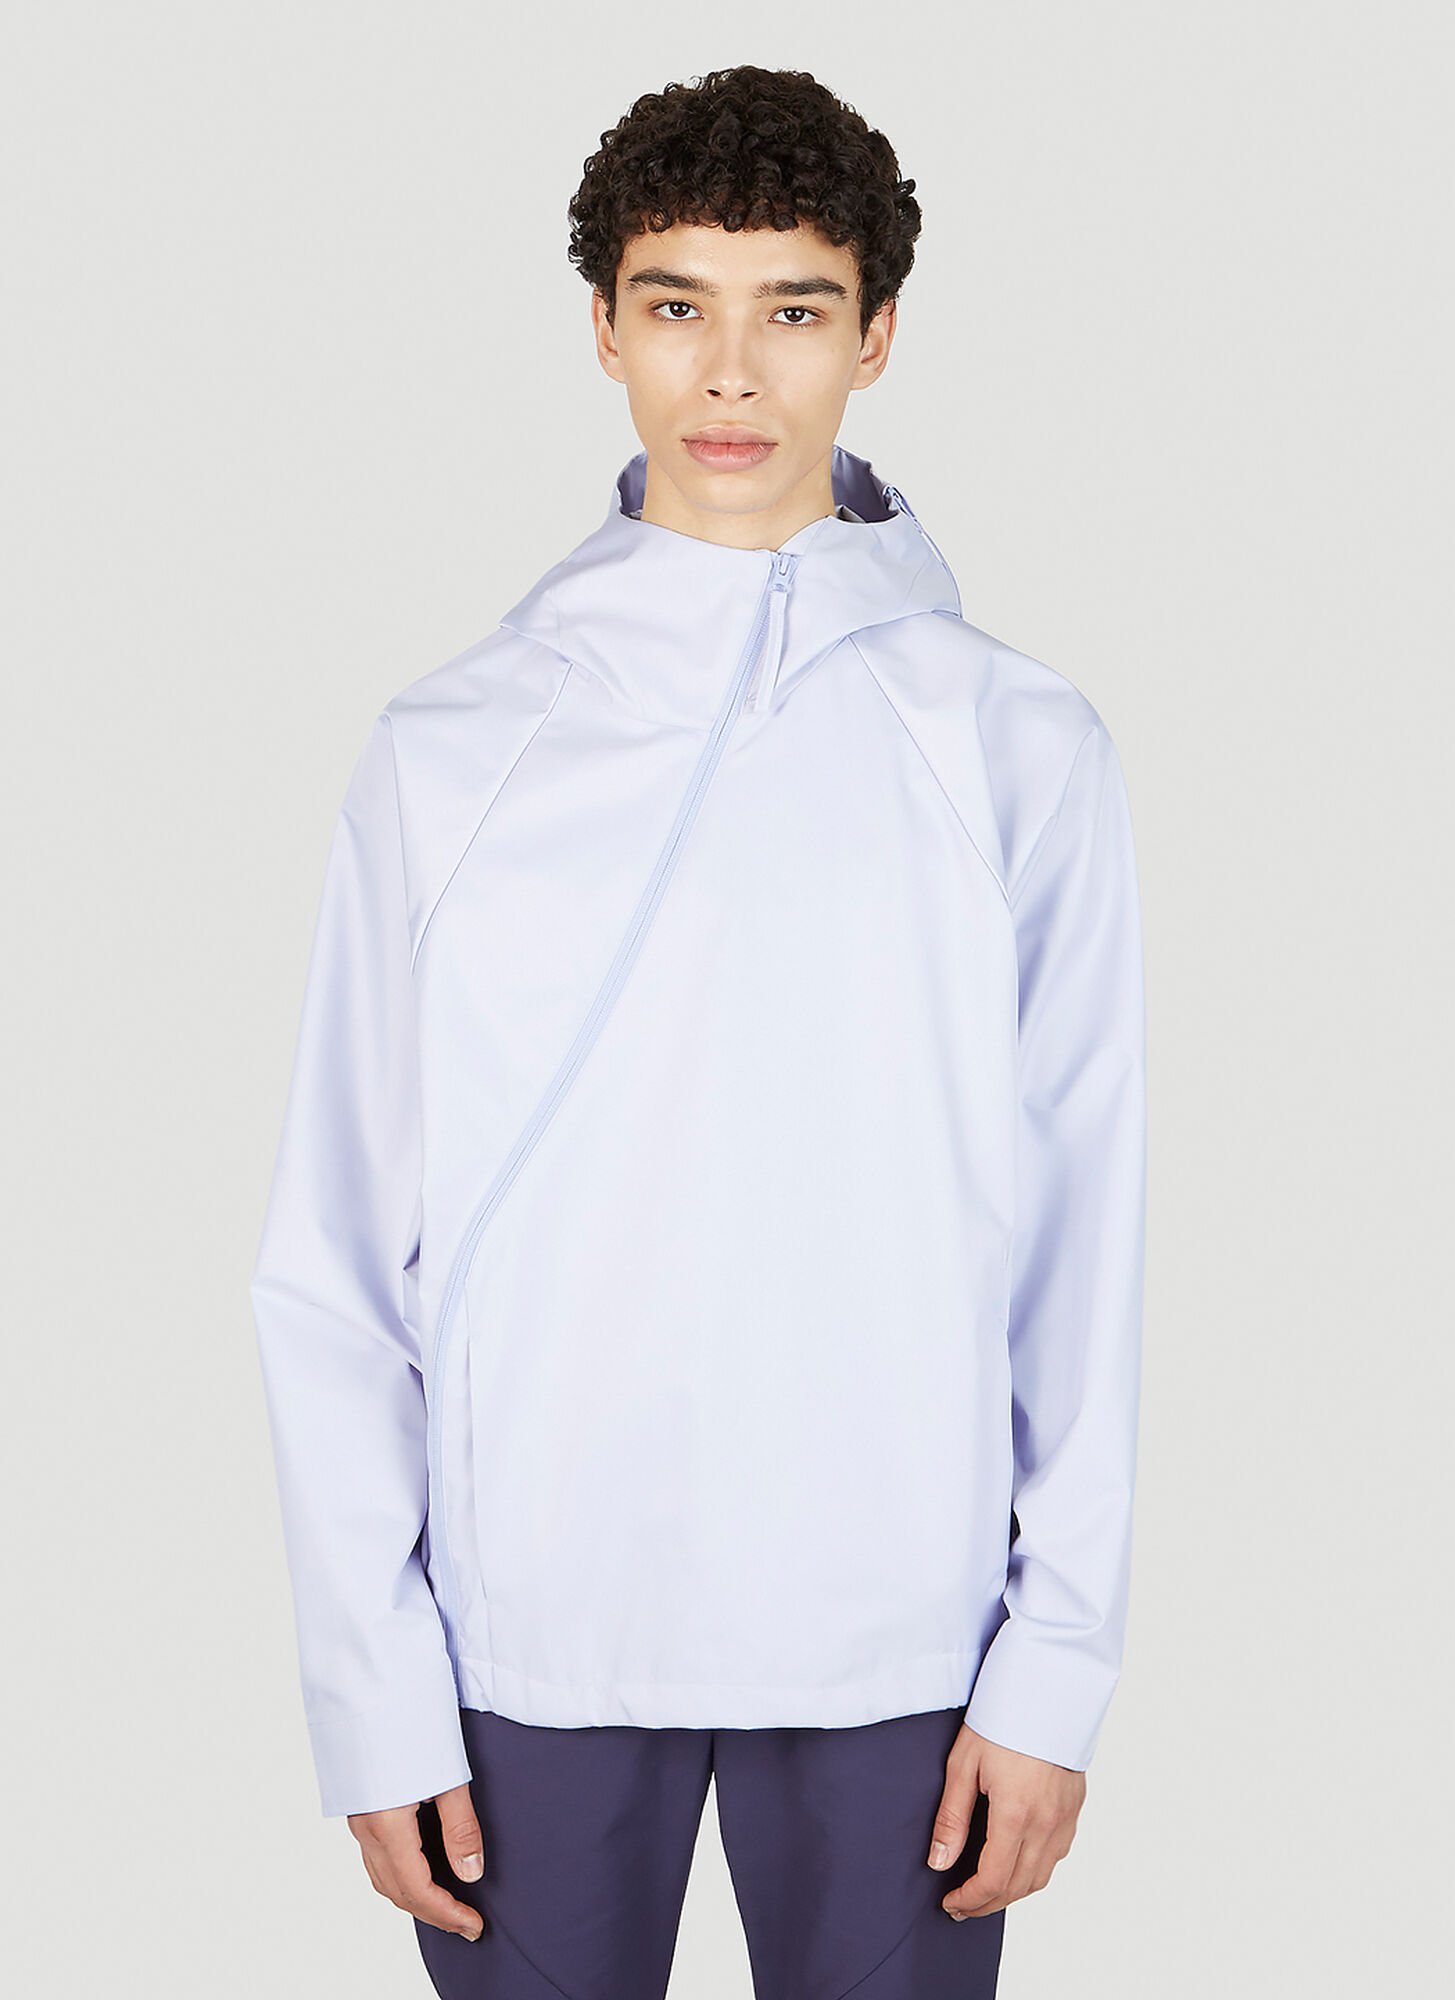 Post Archive Faction (paf) 5.0 Technical Center Jacket In Lilac